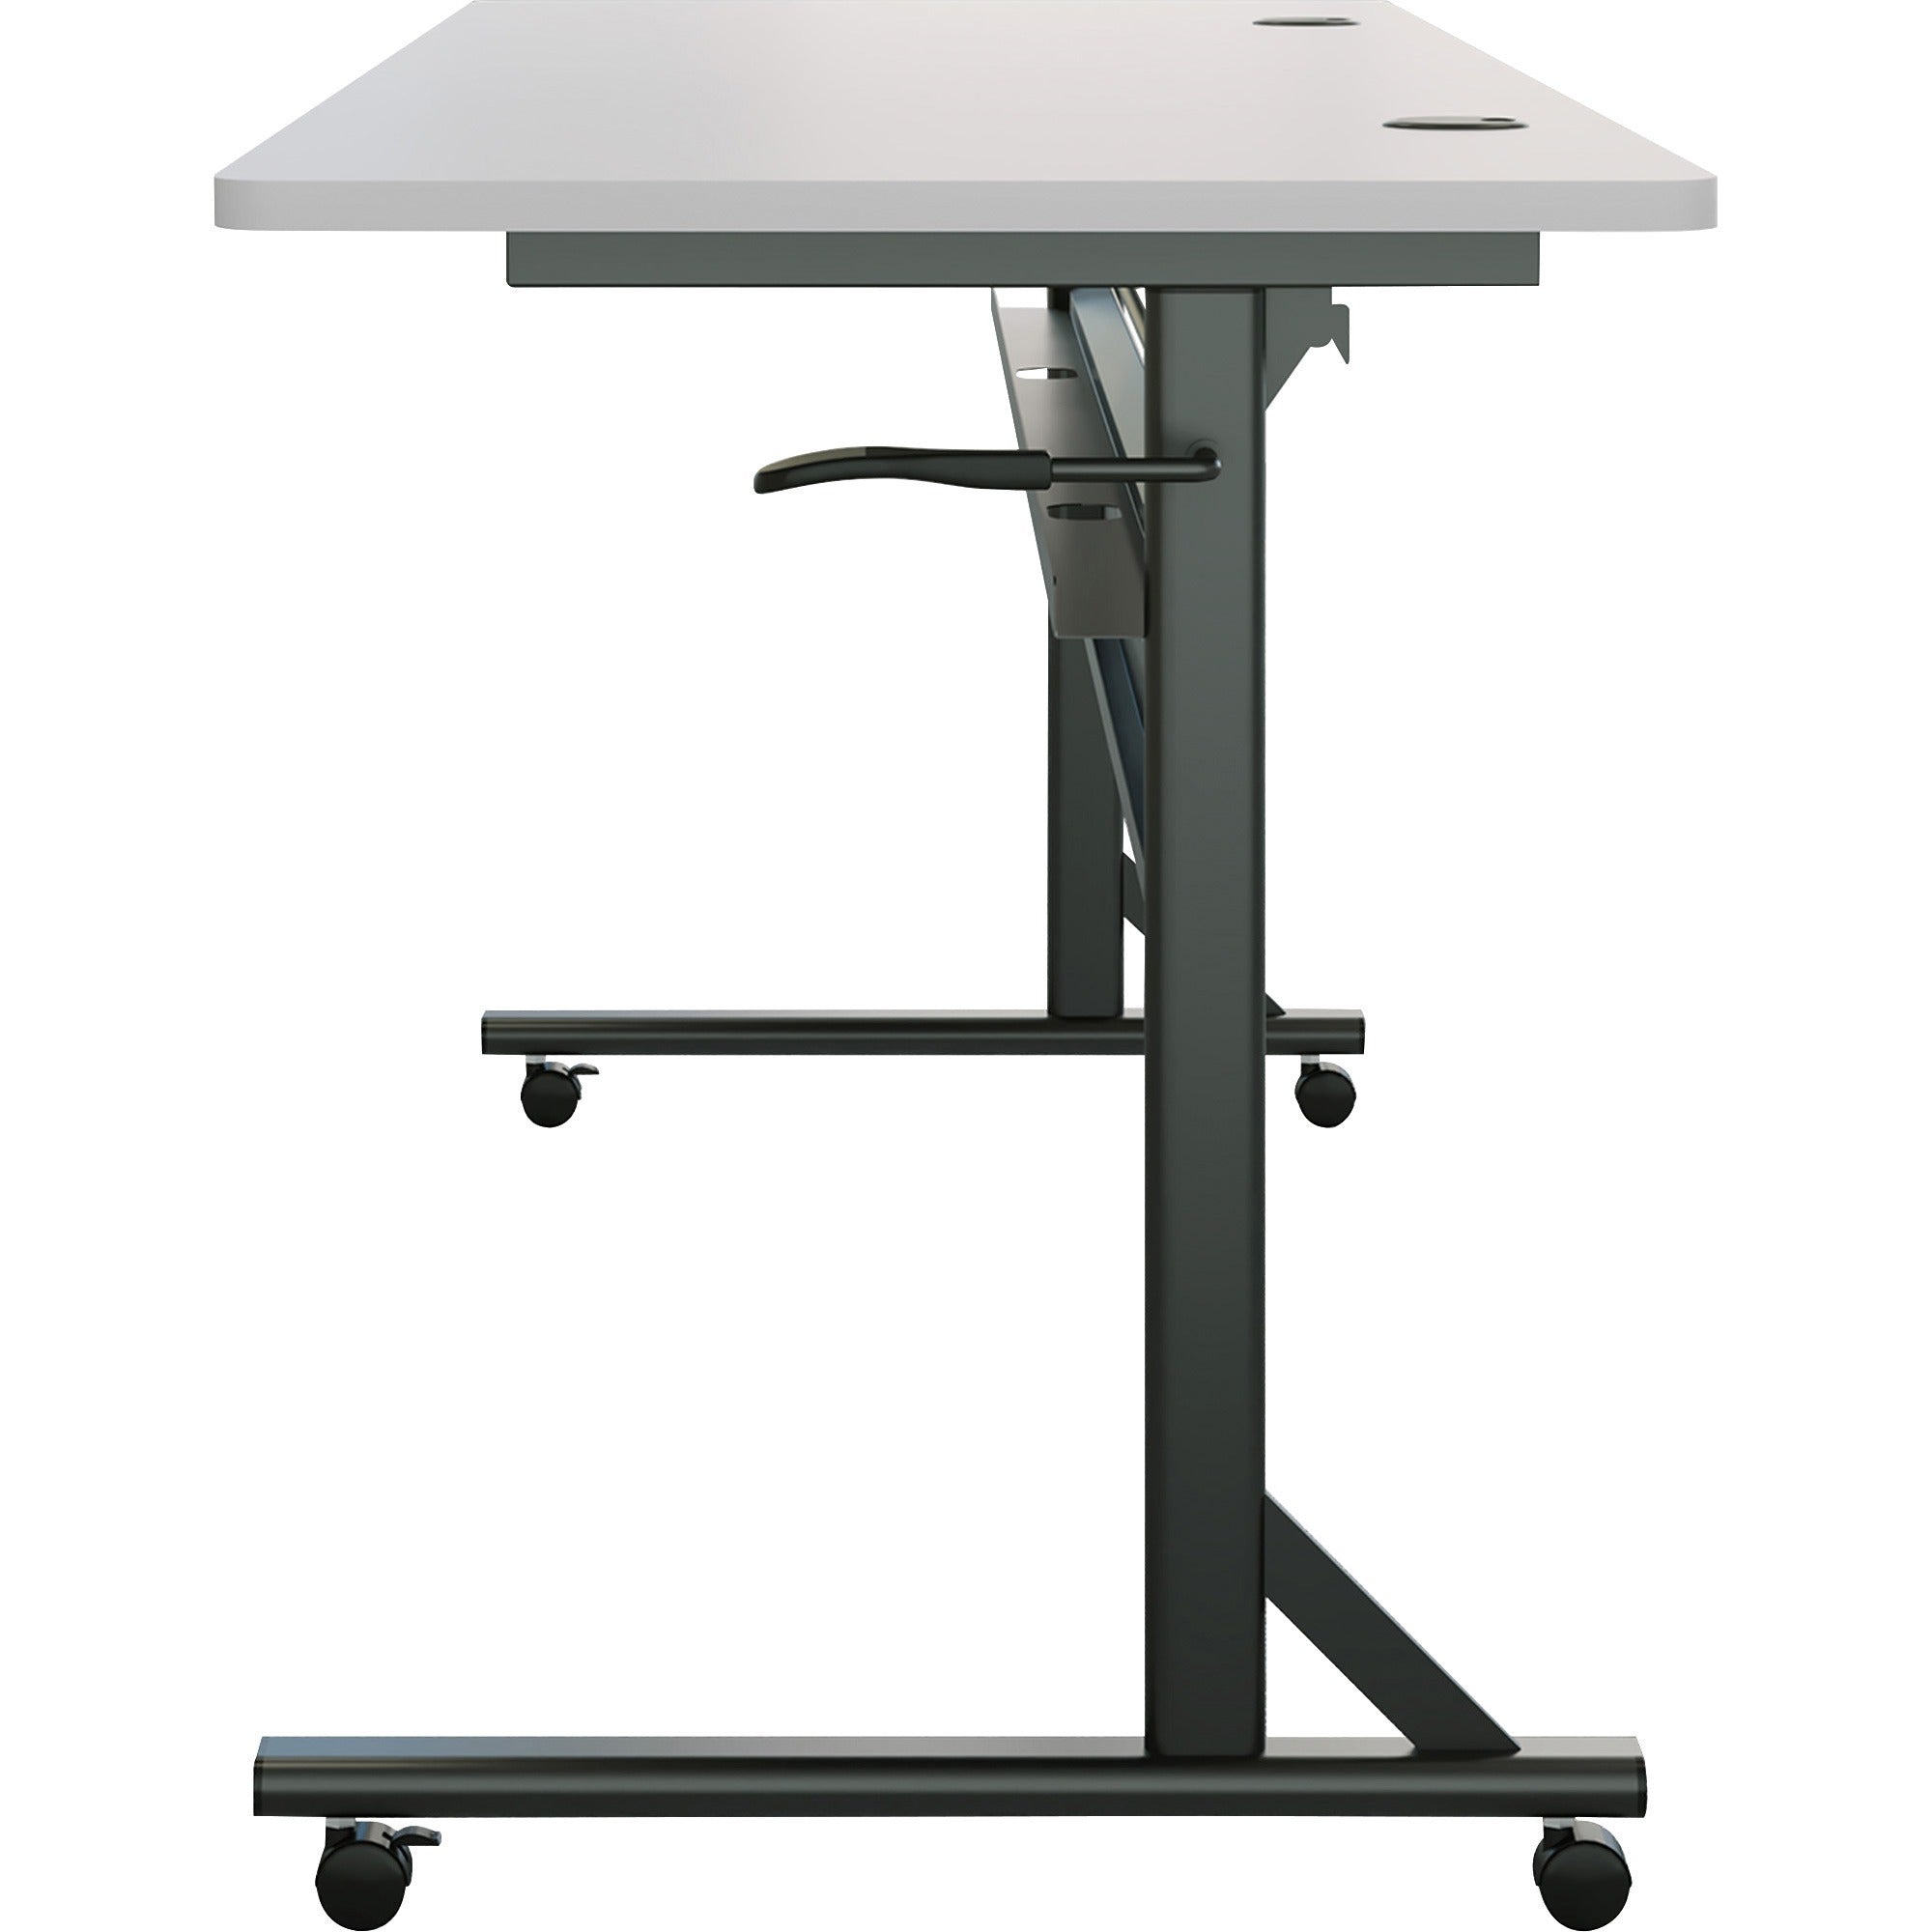 lorell-shift-20-flip-and-nesting-mobile-table-for-table-toplaminated-rectangle-top-72-table-top-length-x-24-table-top-width-x-1-table-top-thickness-2950-height-assembly-required-gray-1-each_llr60767 - 4